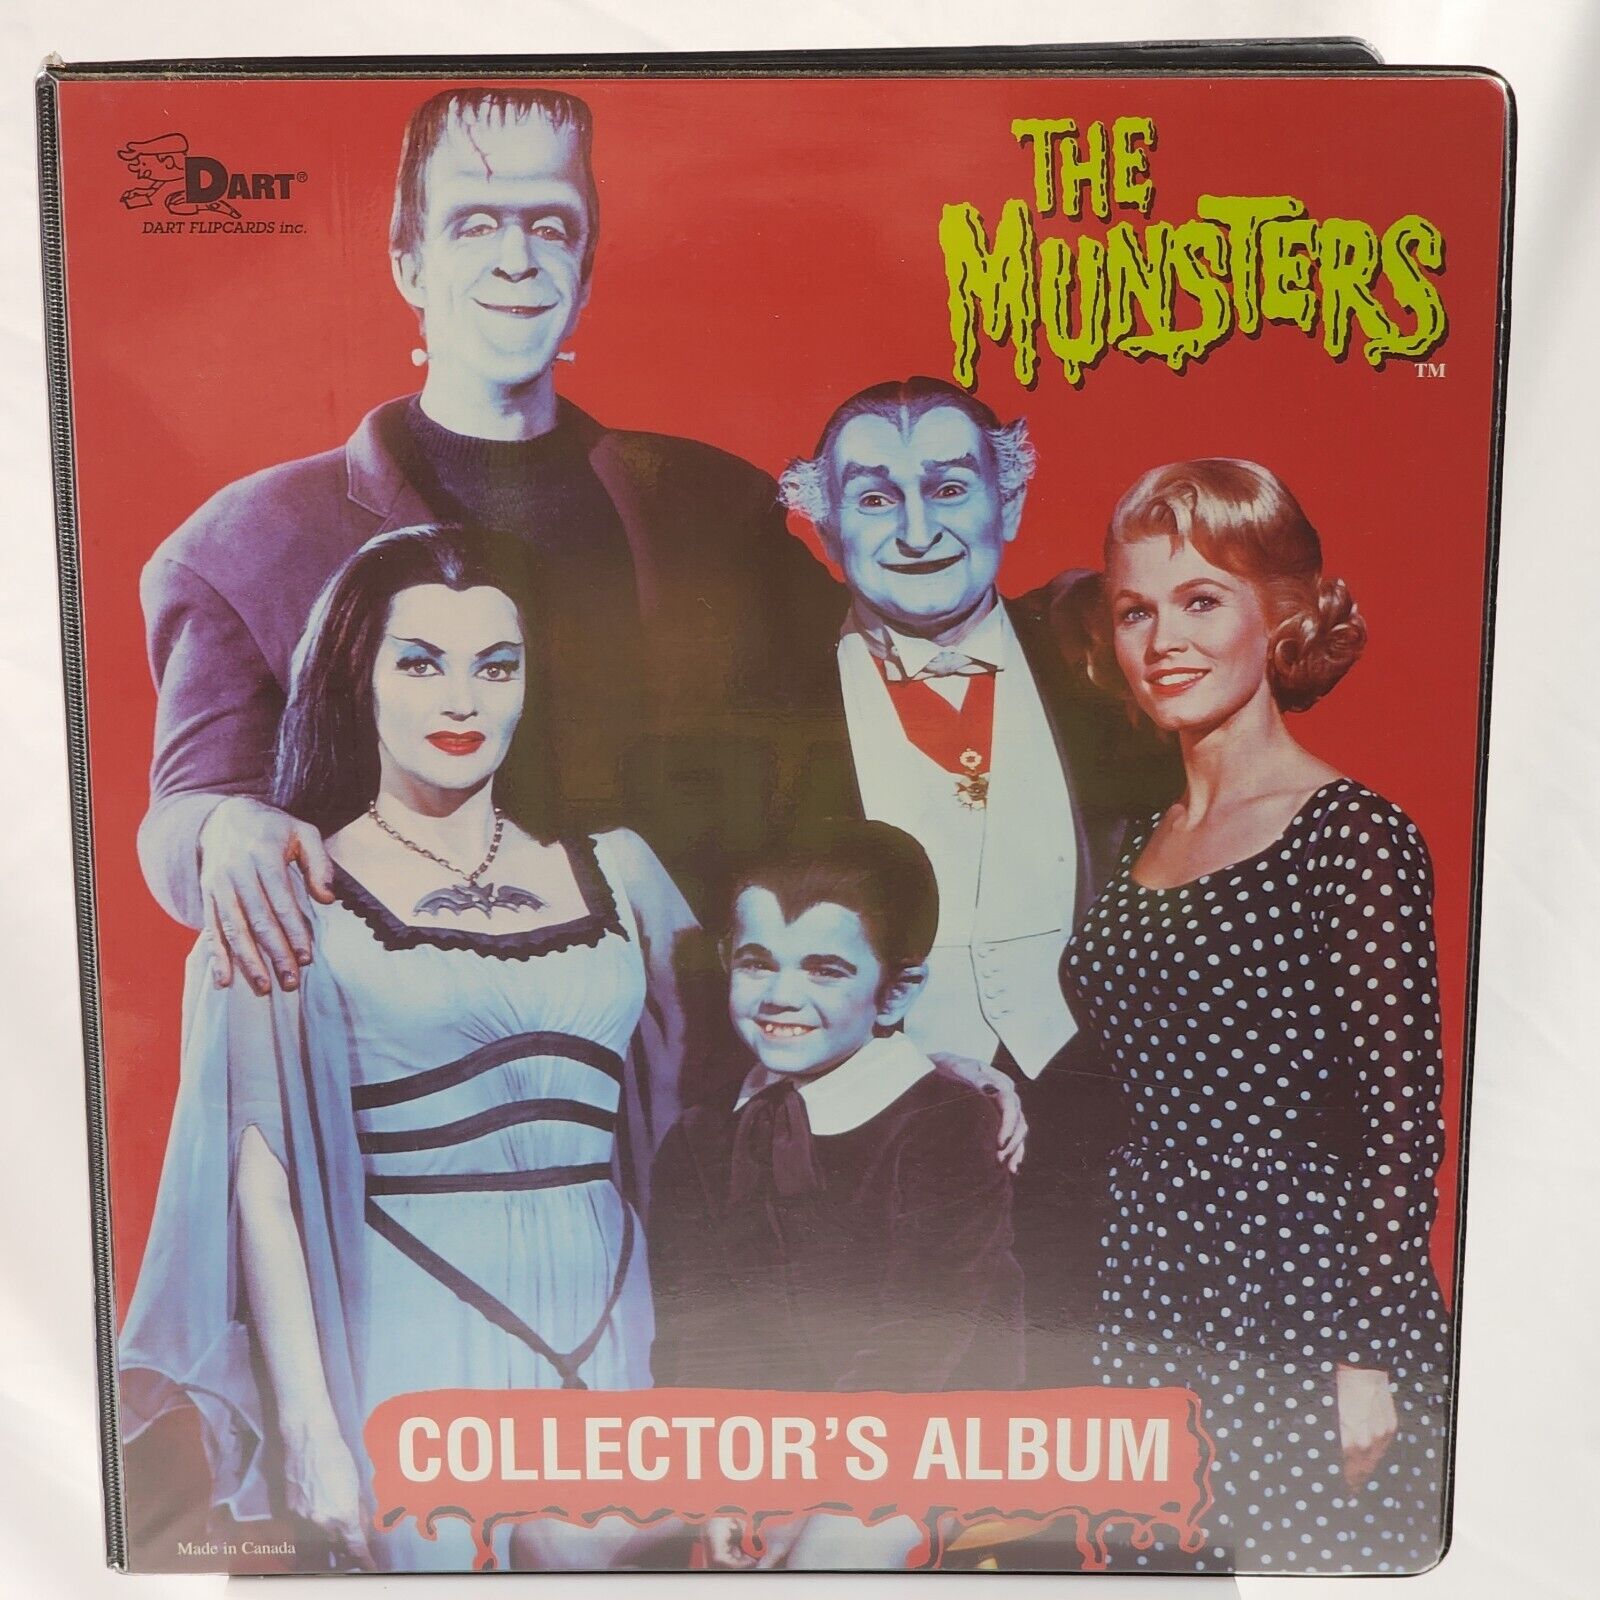 Vtg The Munsters Collectors Album Binder For Collectible Trading Cards 1996 Dart